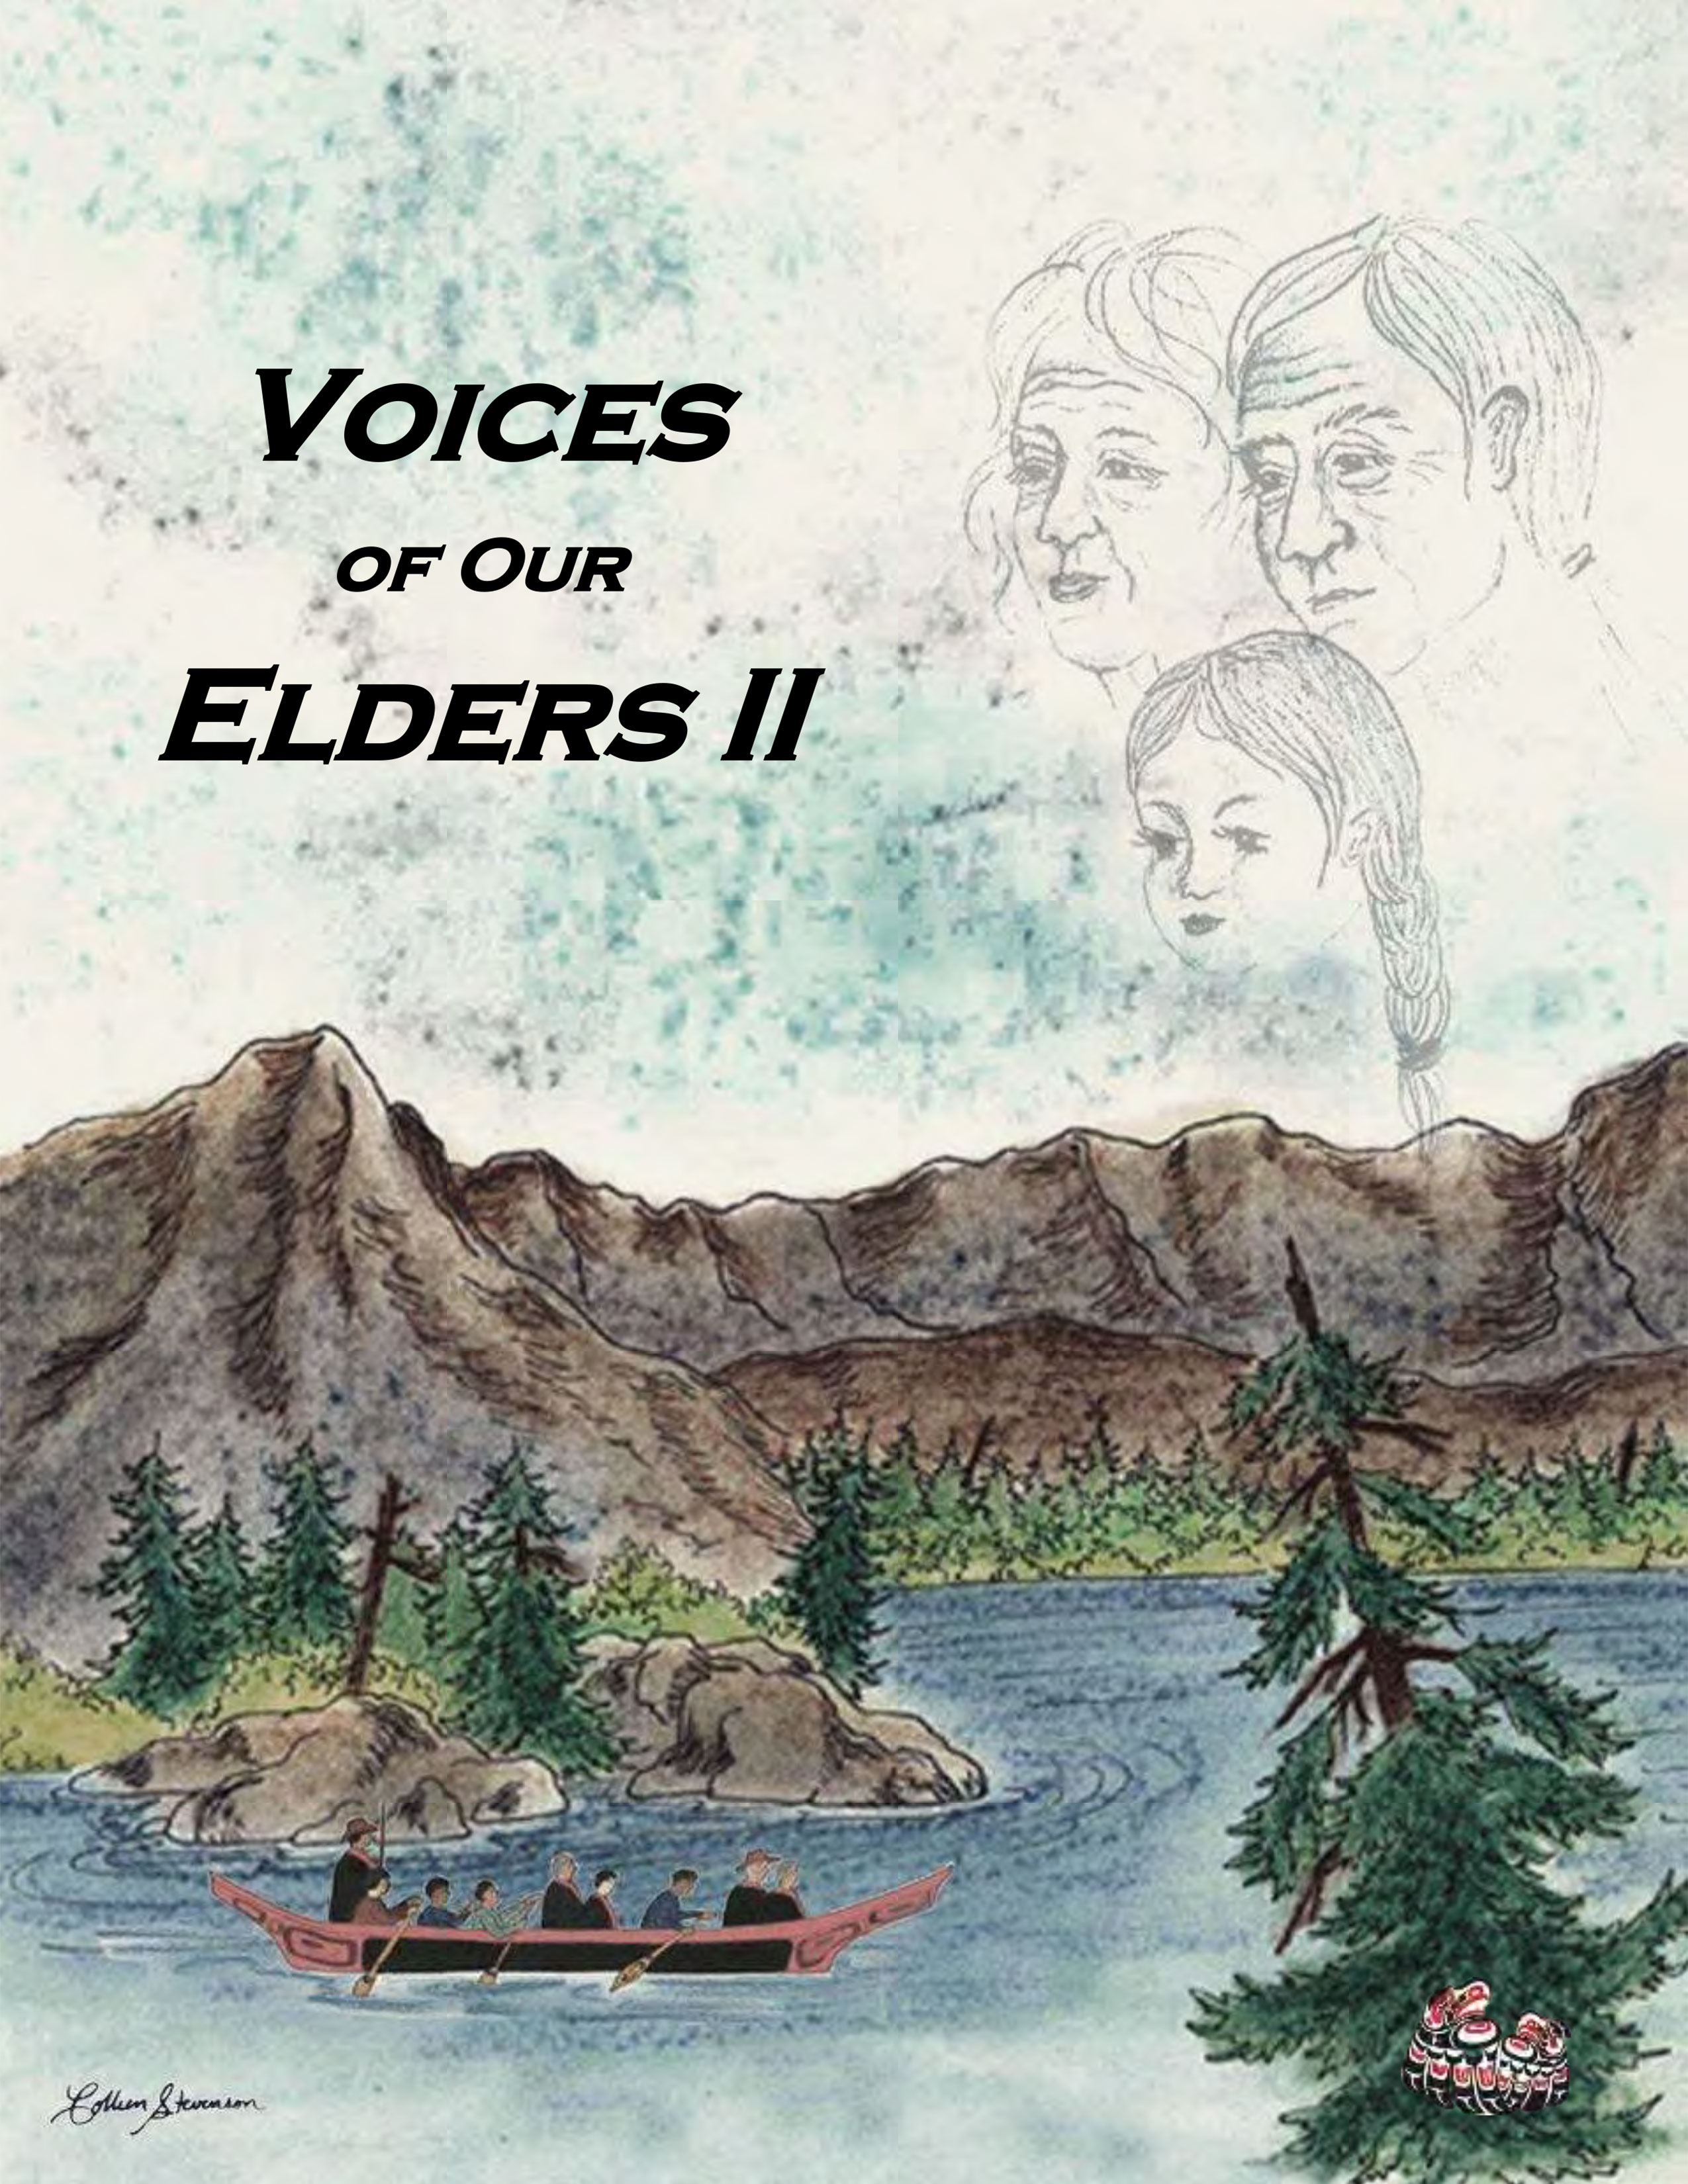 Voices of Our Elders II - November, 2012